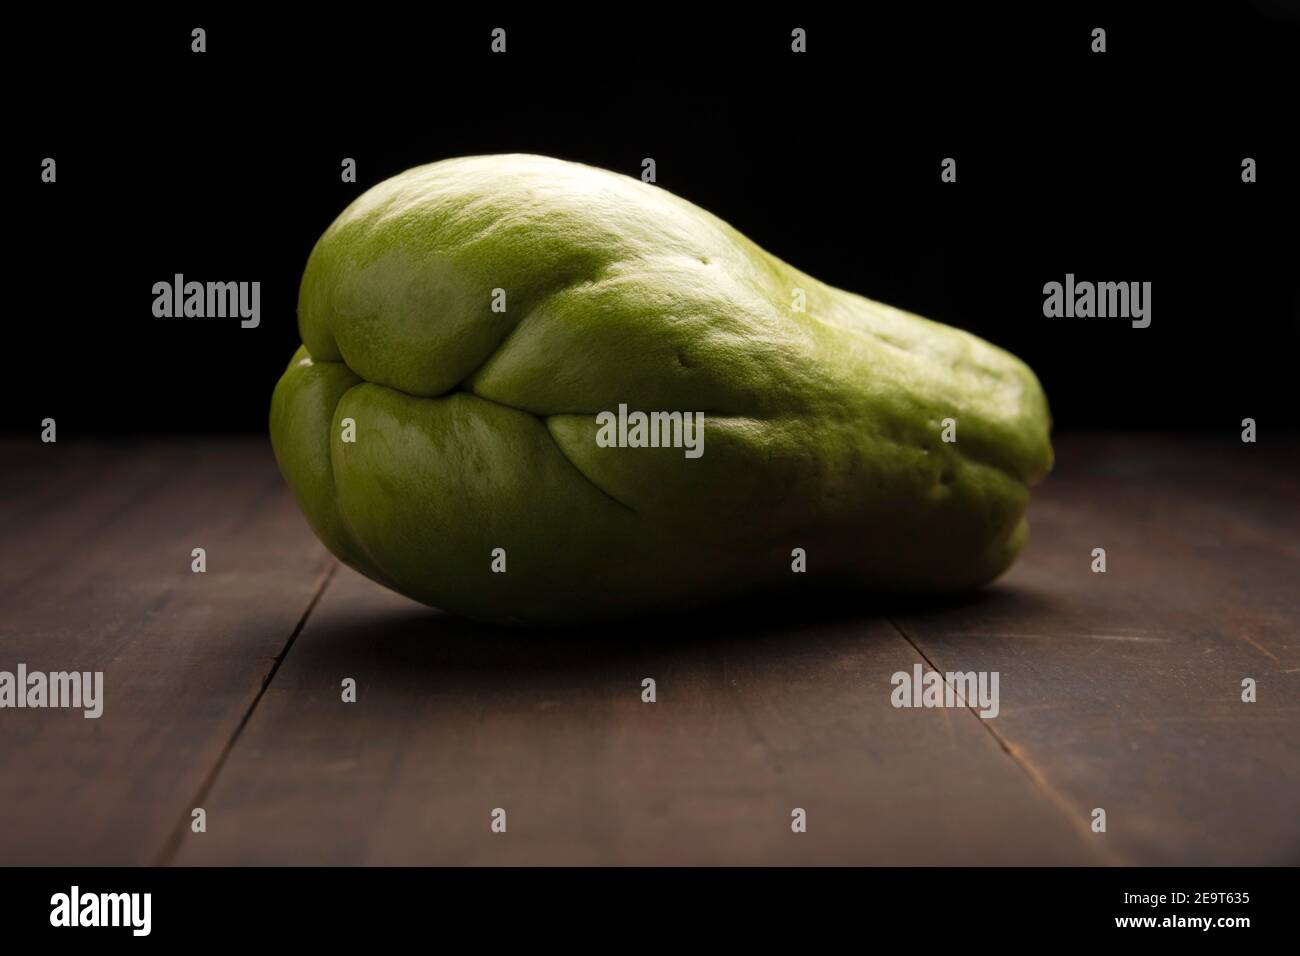 image of a chayote fruit close up on rustic wooden surface and black background Stock Photo